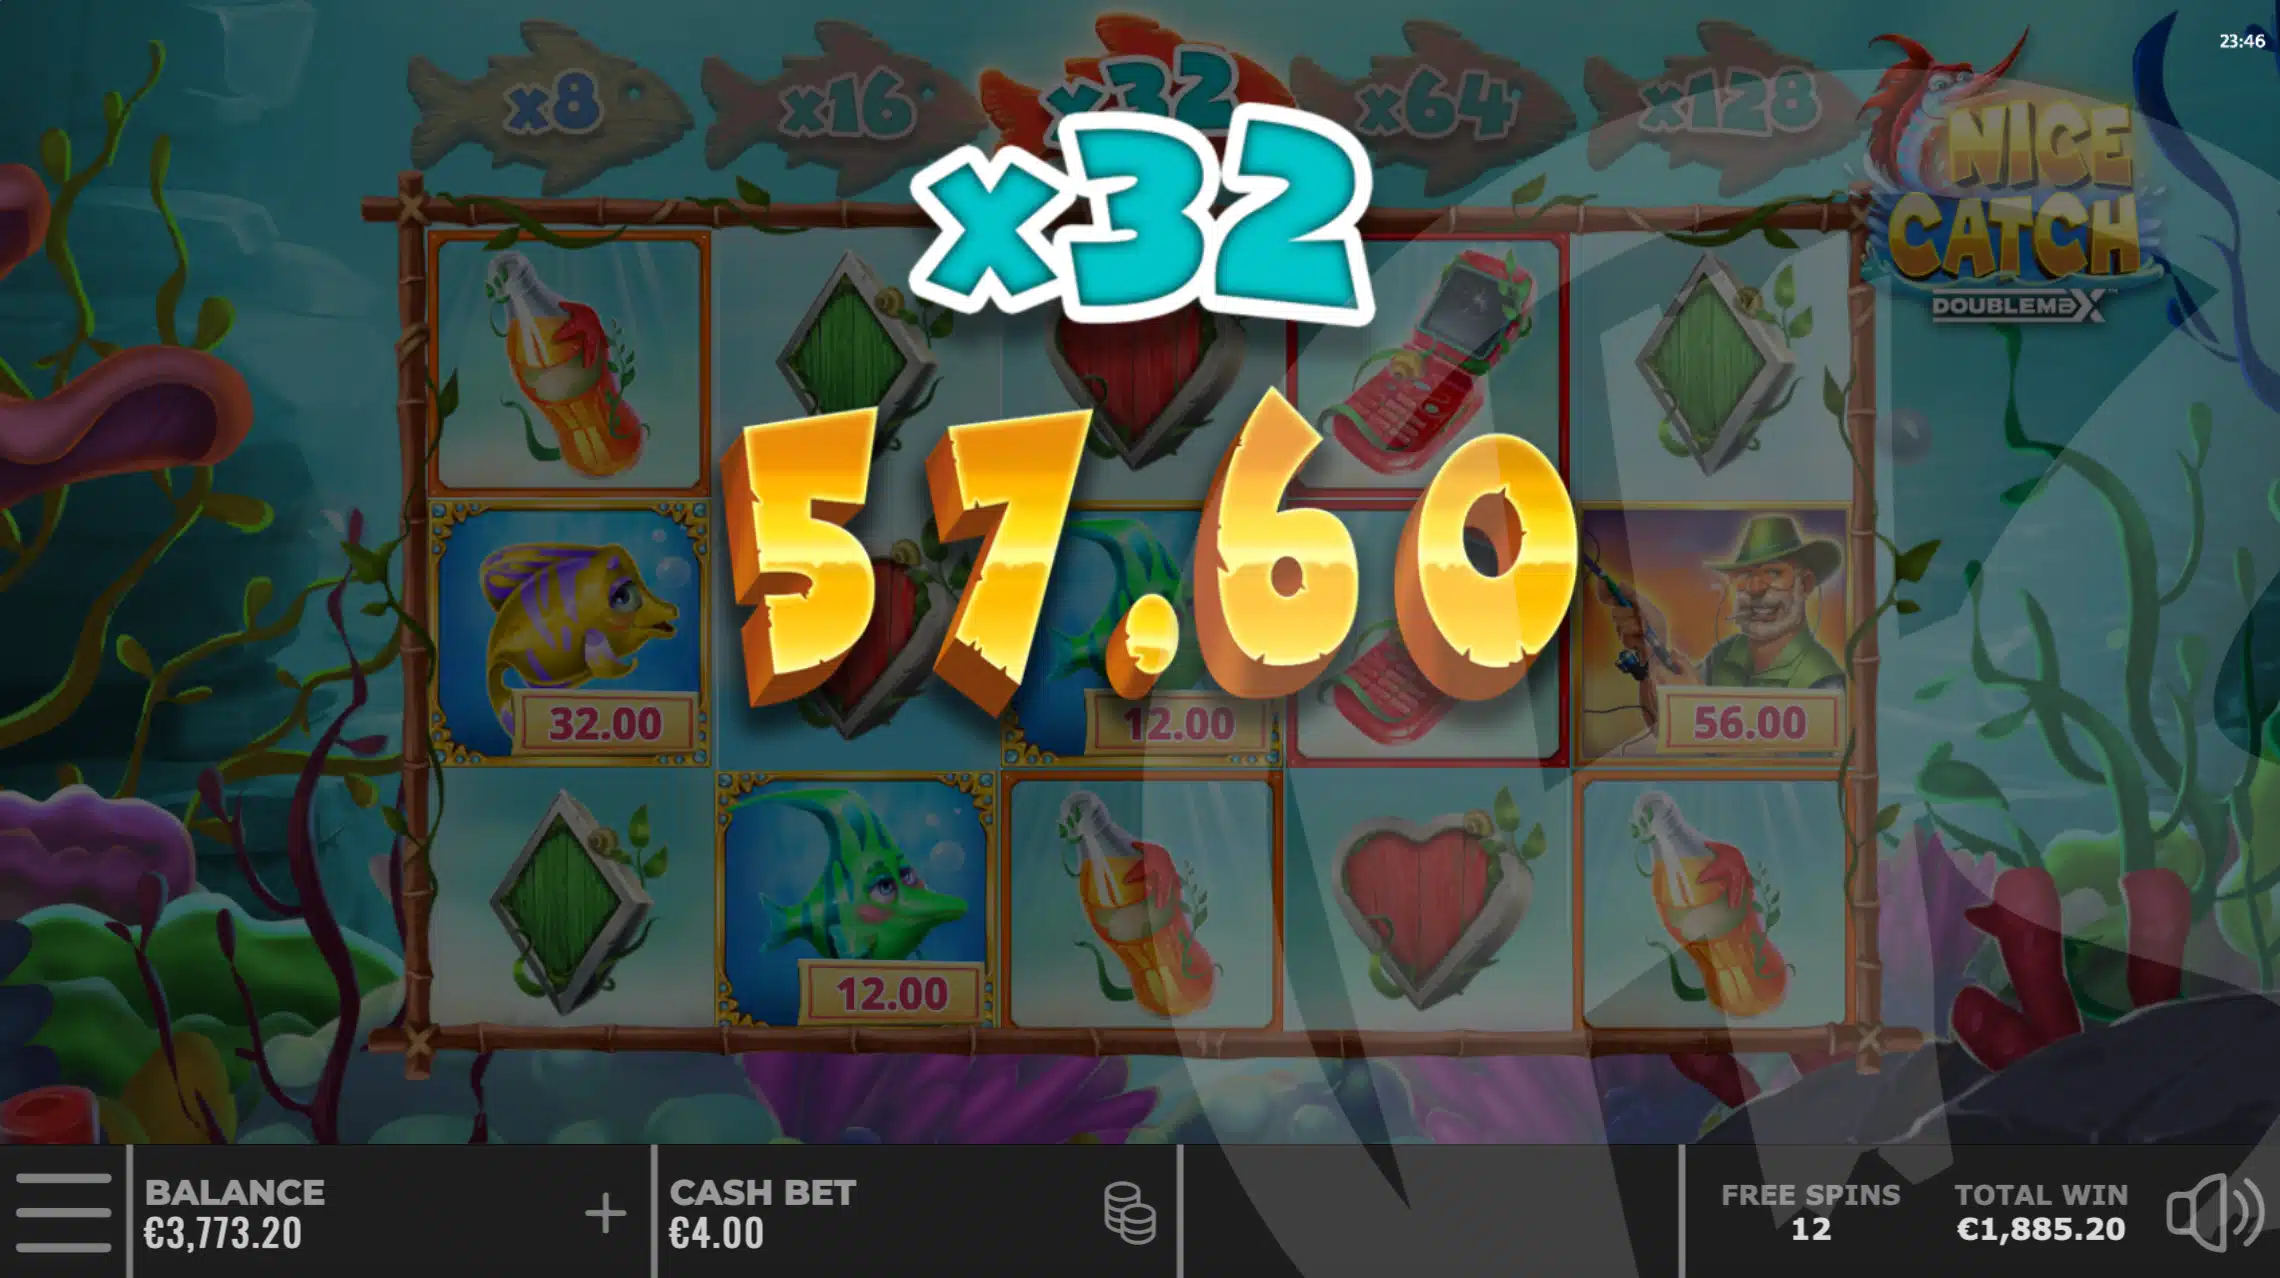 Nice Catch DoubleMax Free Spins